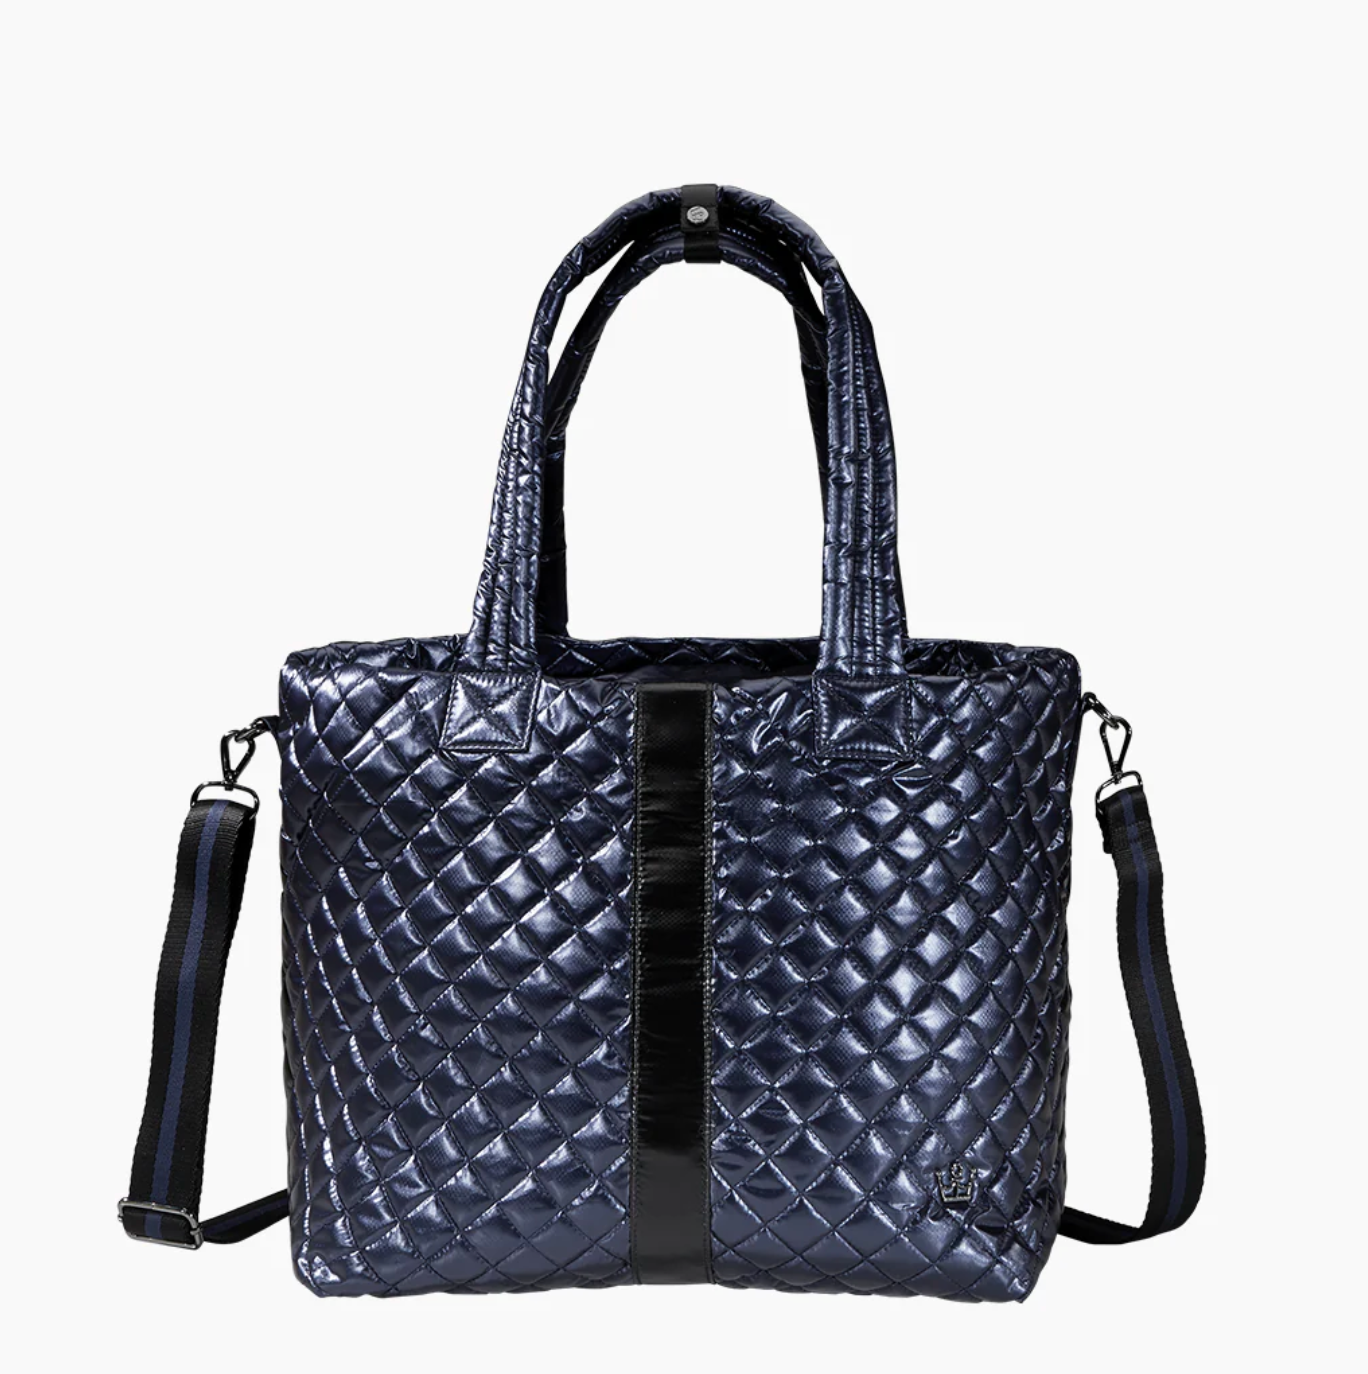 Oliver Thomas Kitchen Sink Tote 2 Luggage, Totes in Midnight Navy/Dark Side Stripe at Wrapsody